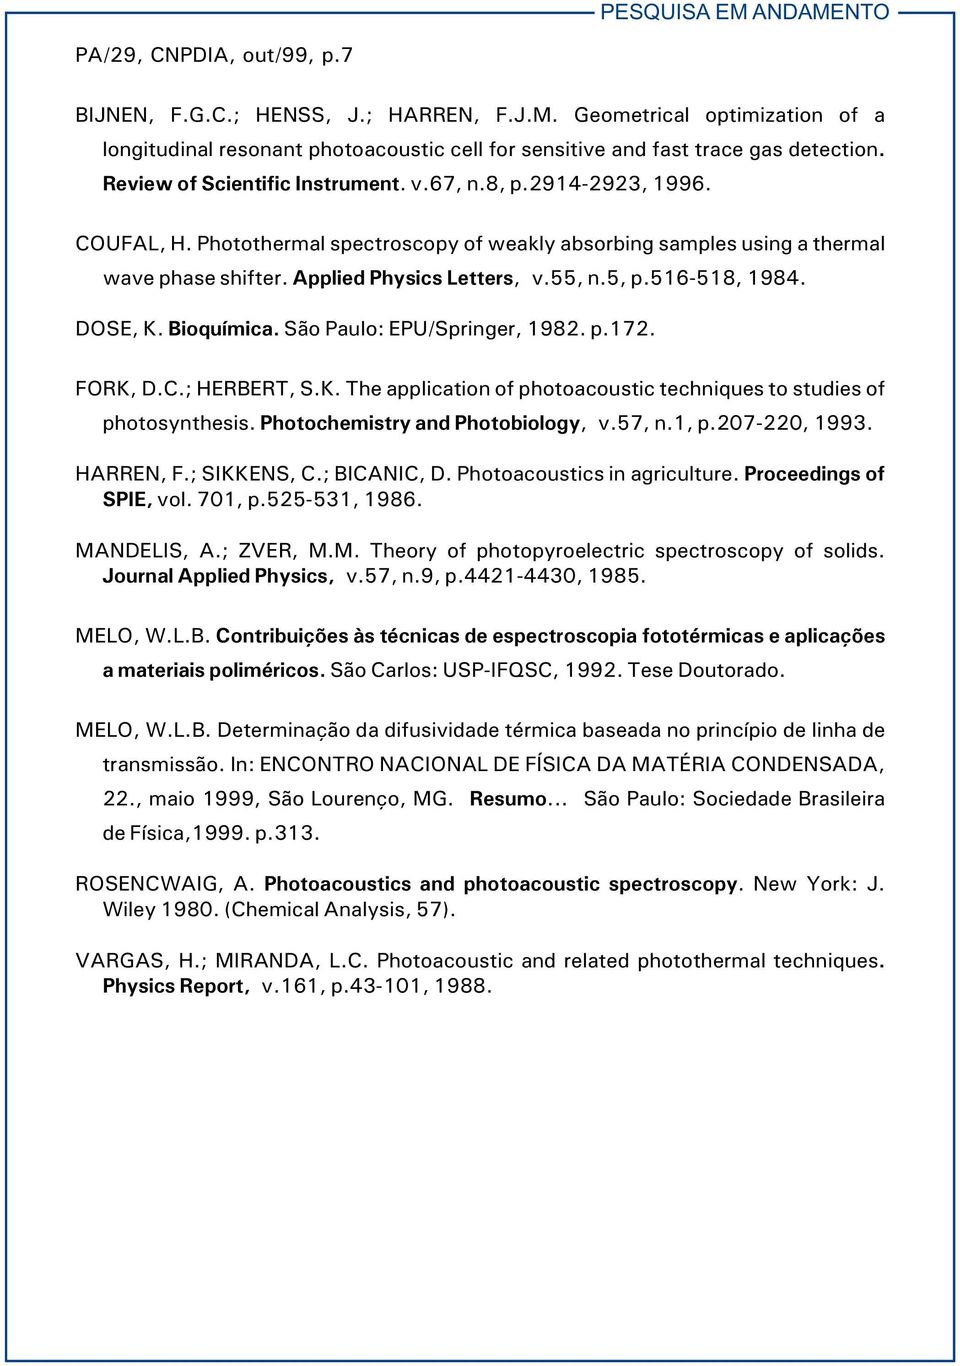 5, p.516-518, 1984. DOSE, K. Bioquímica. São Paulo: EPU/Springer, 1982. p.172. FORK, D.C.; HERBERT, S.K. The application of photoacoustic techniques to studies of photosynthesis.